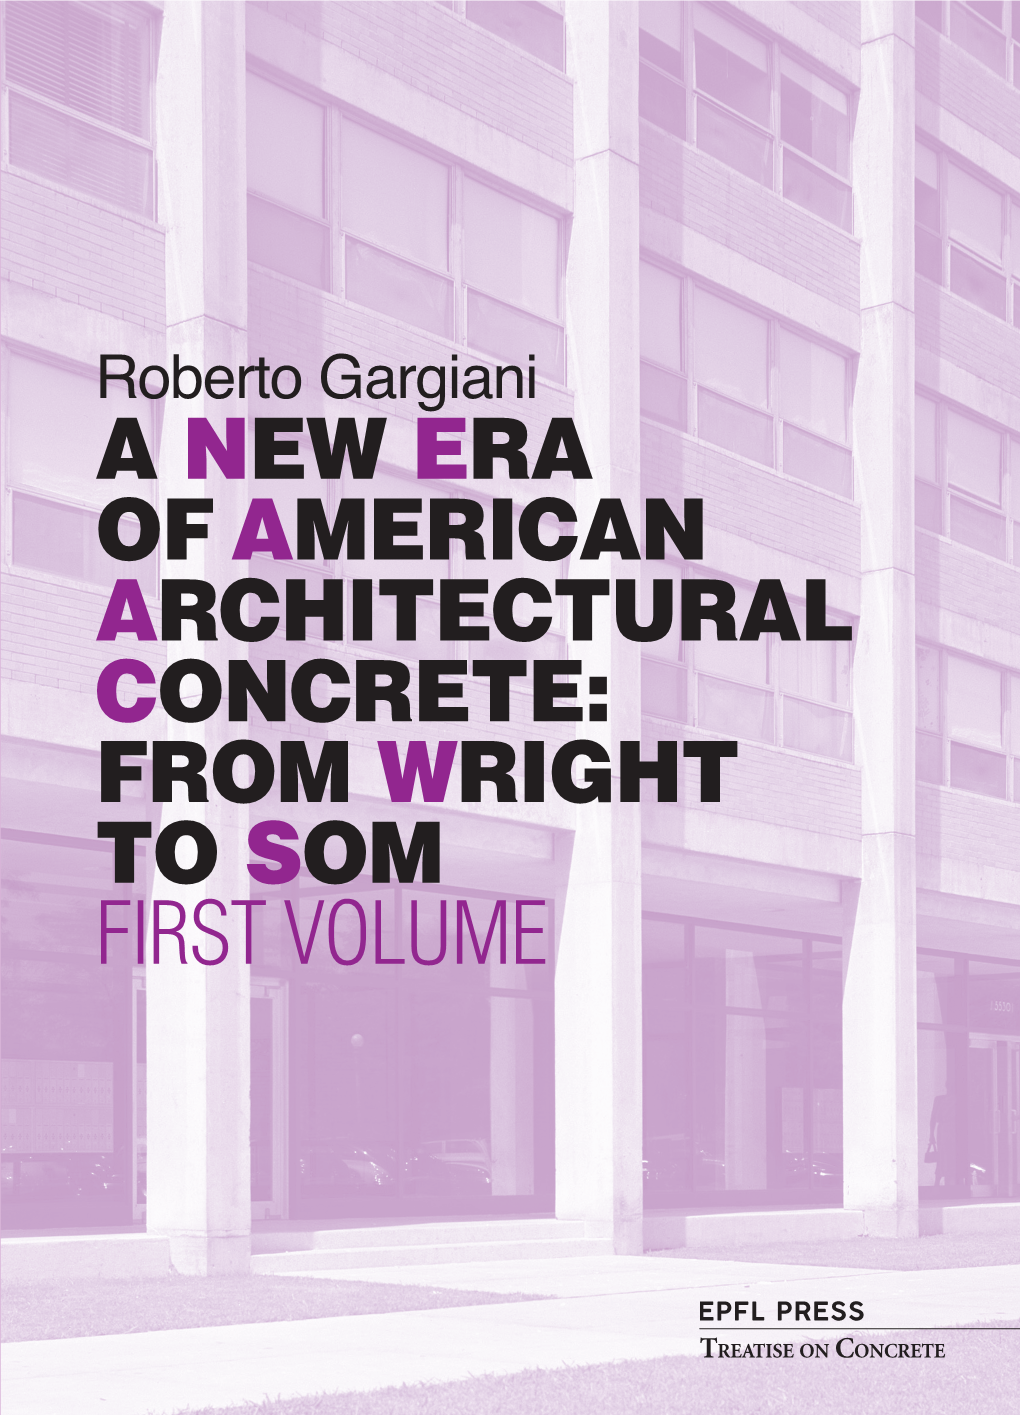 A New Era of American Architectural Concrete: from Wright to Som First Volume